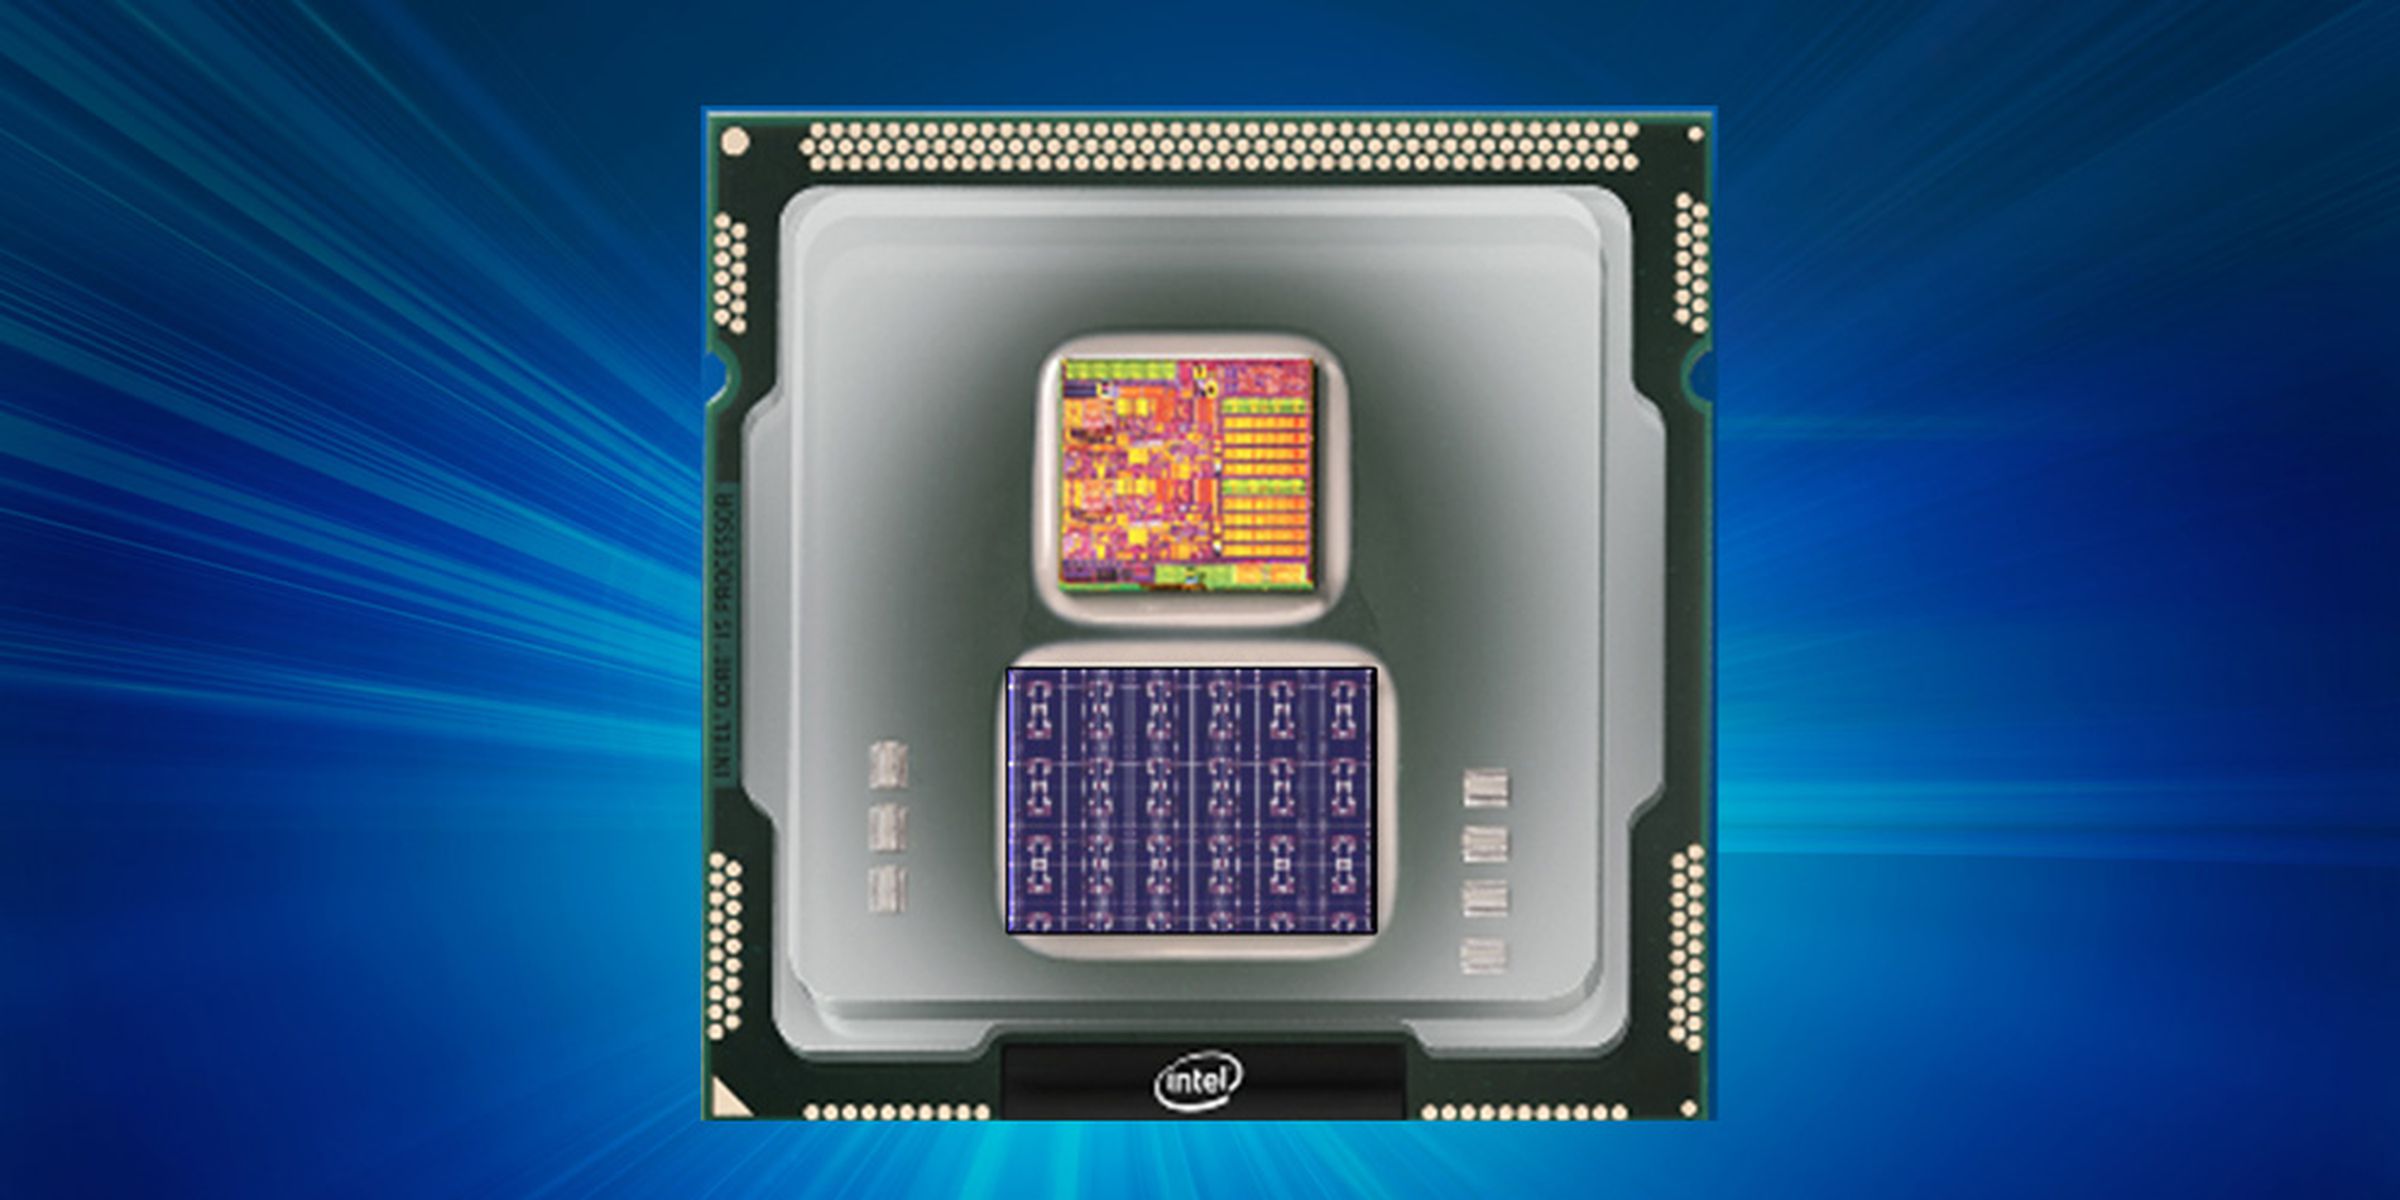 Intel’s new Loihi chip design contains 130,000 neurons. 